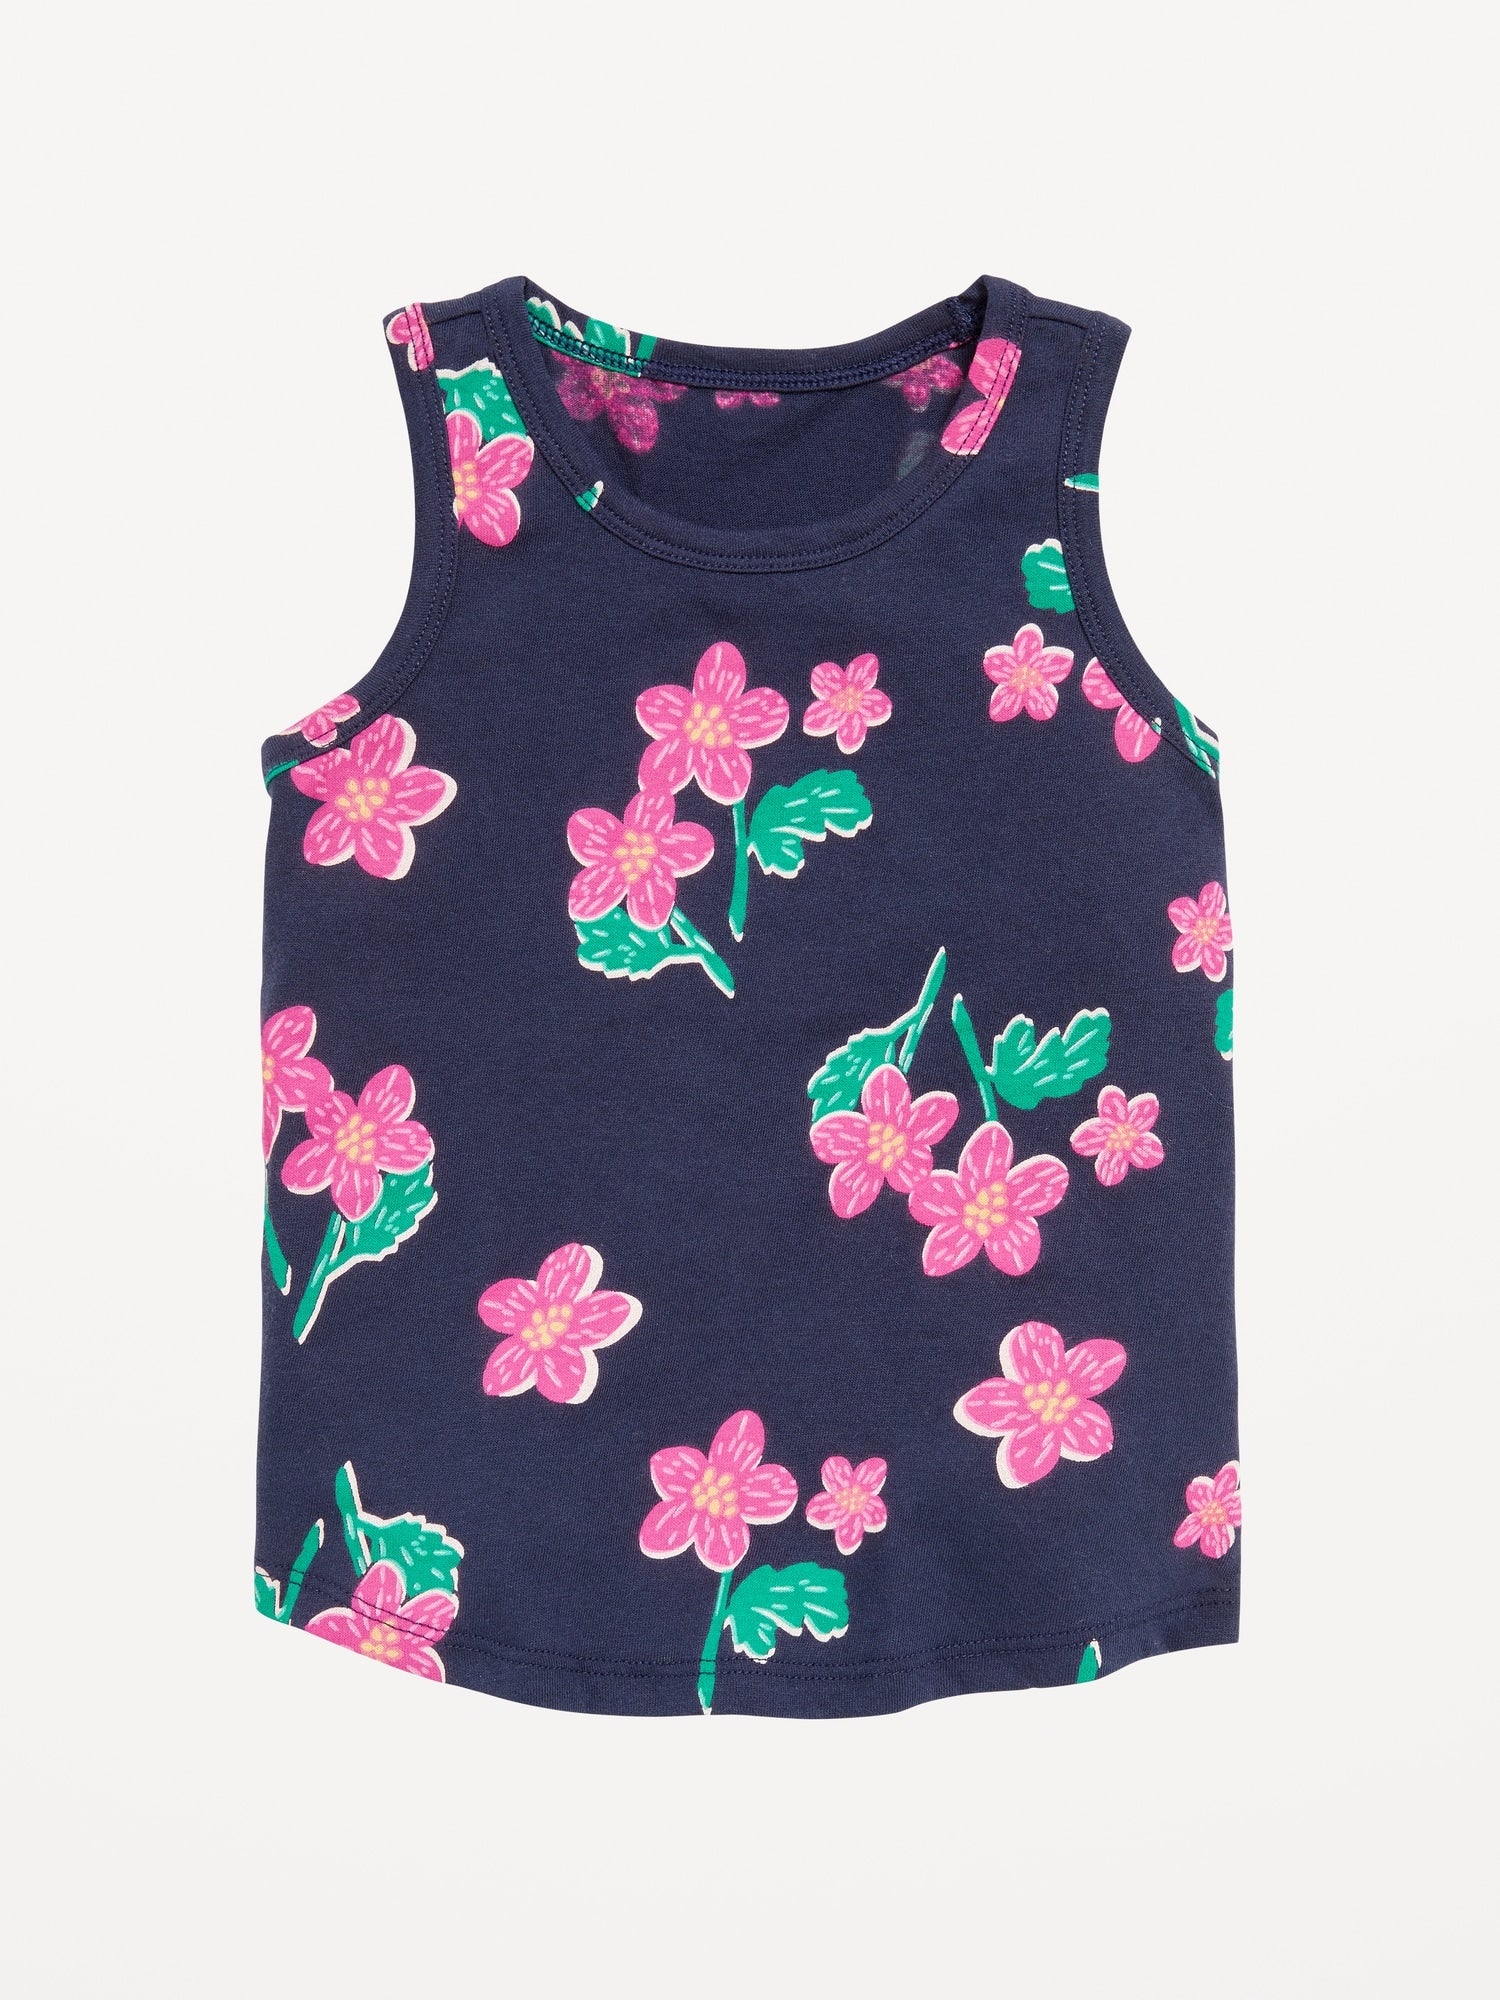 Navy Floral